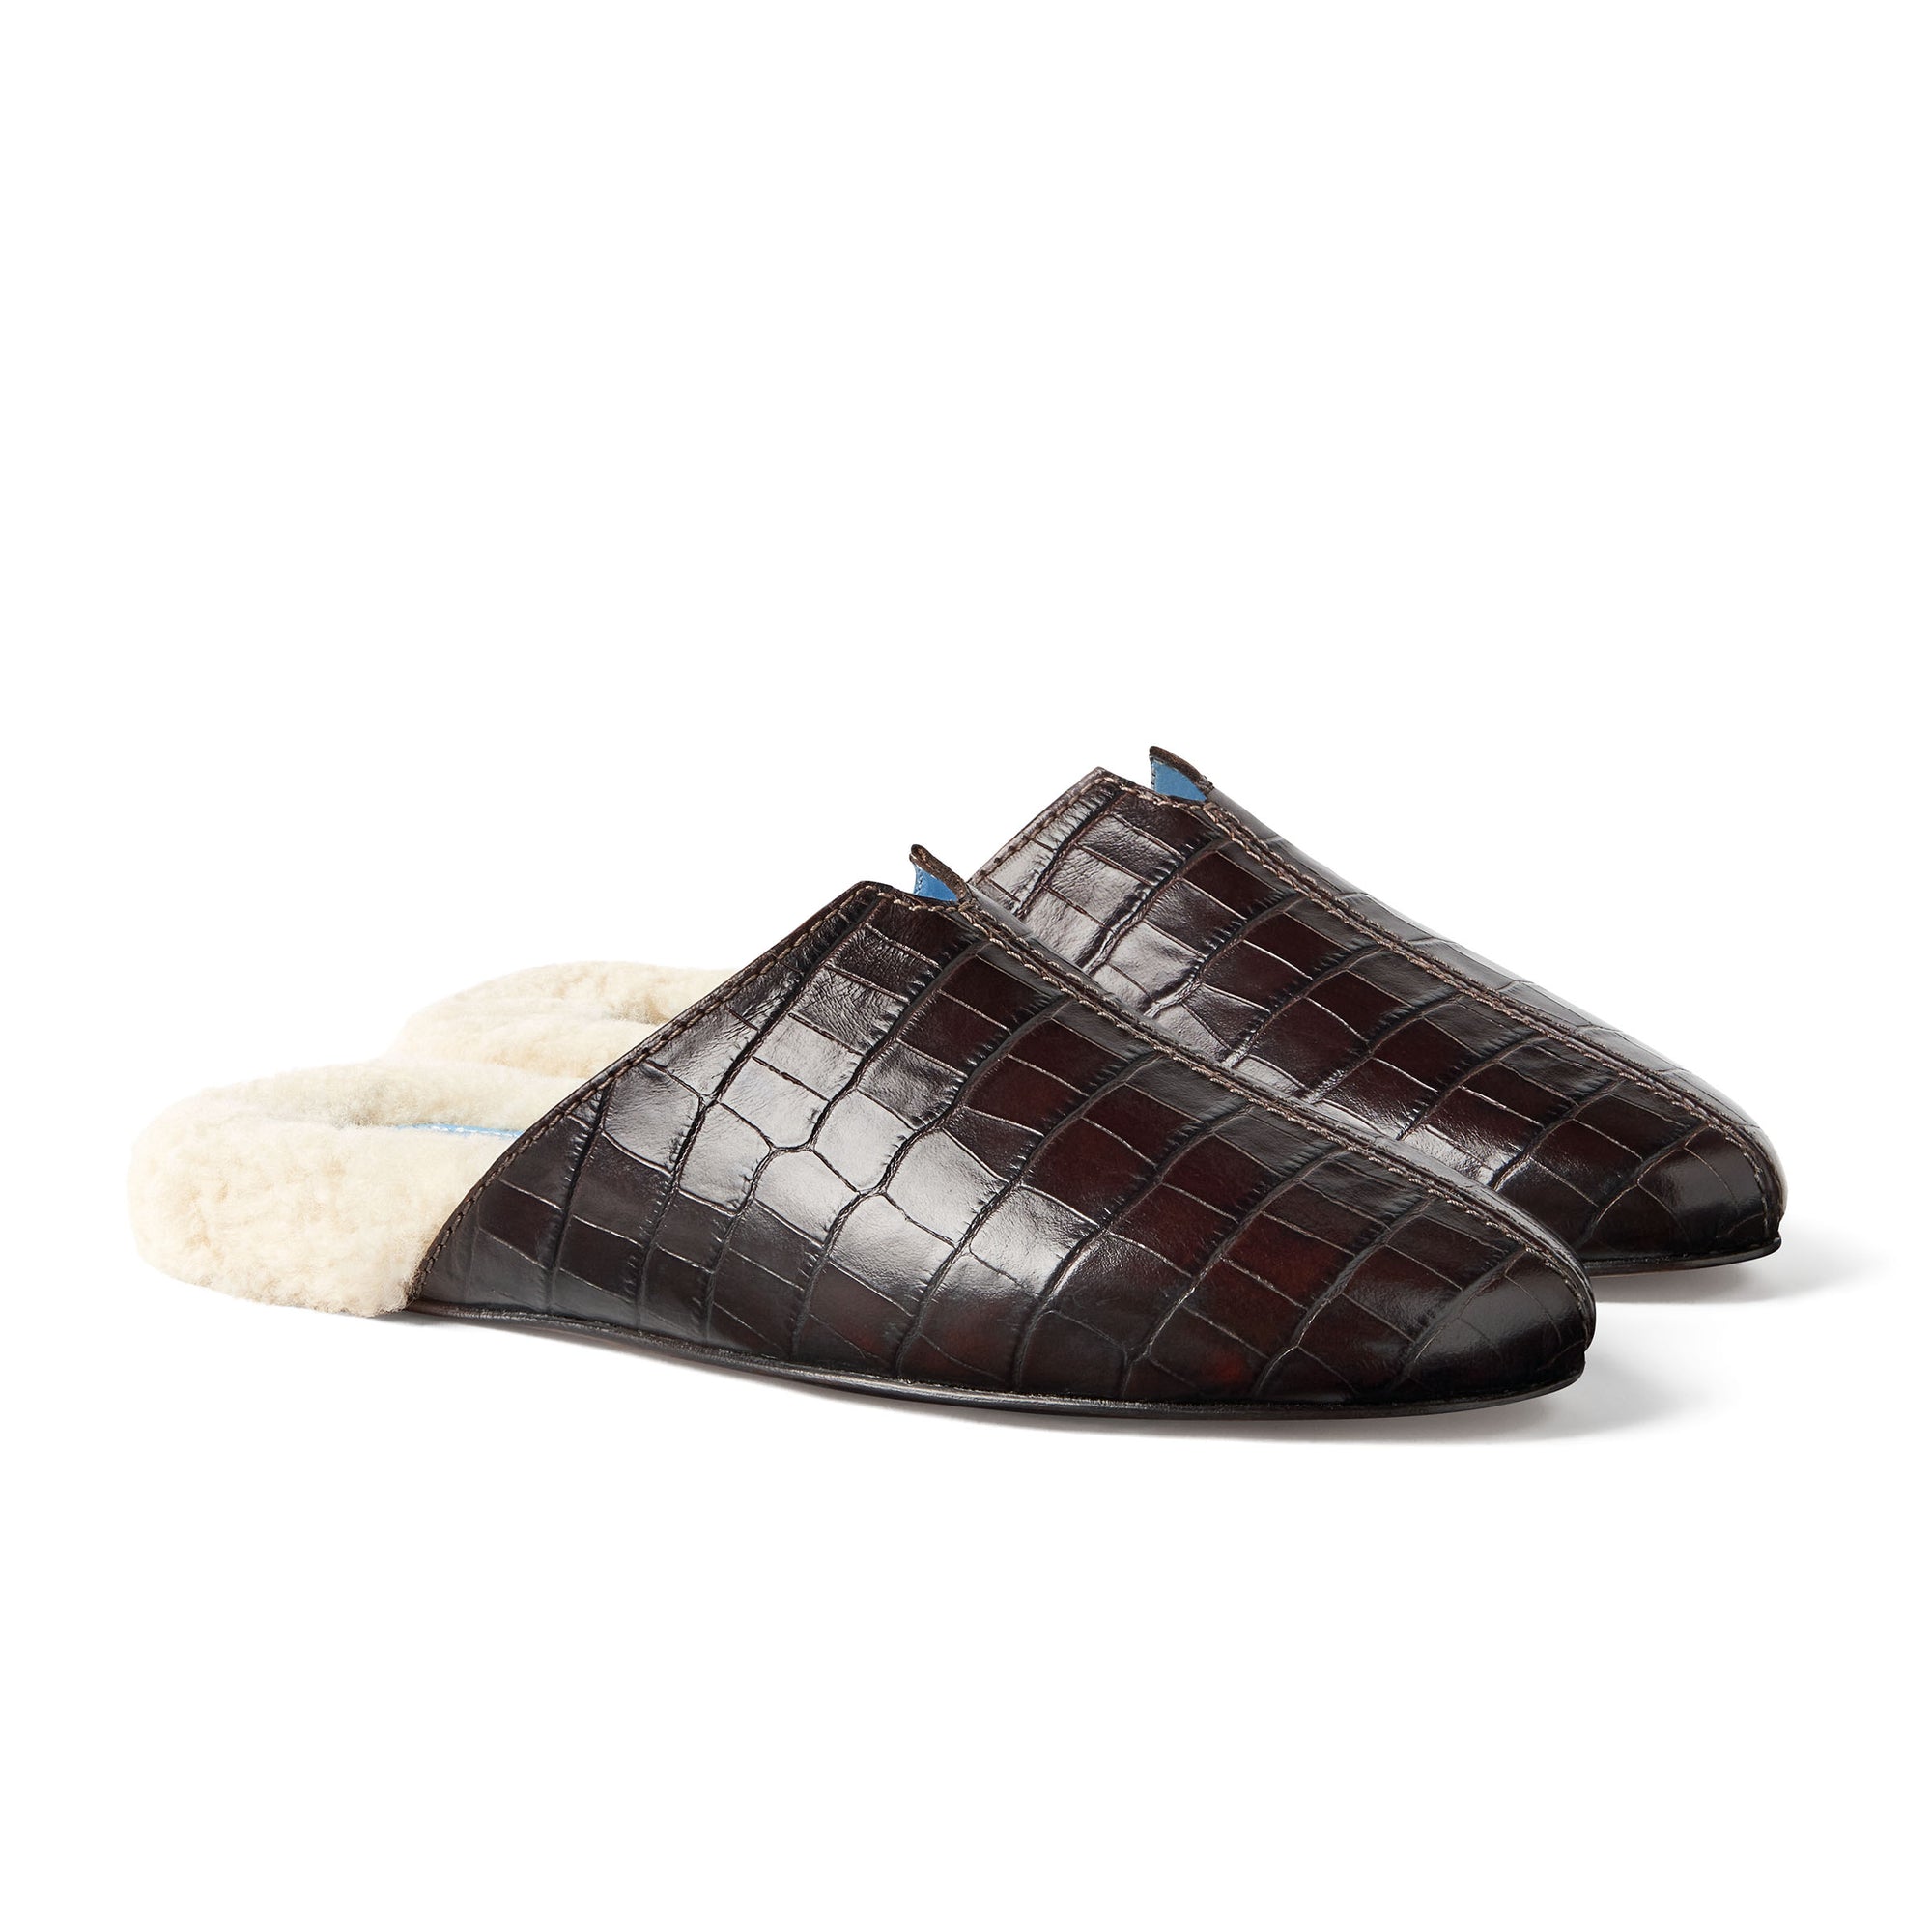 Inabo Women's Little Bite Slipper in brown croc embossed nappa and white shearling